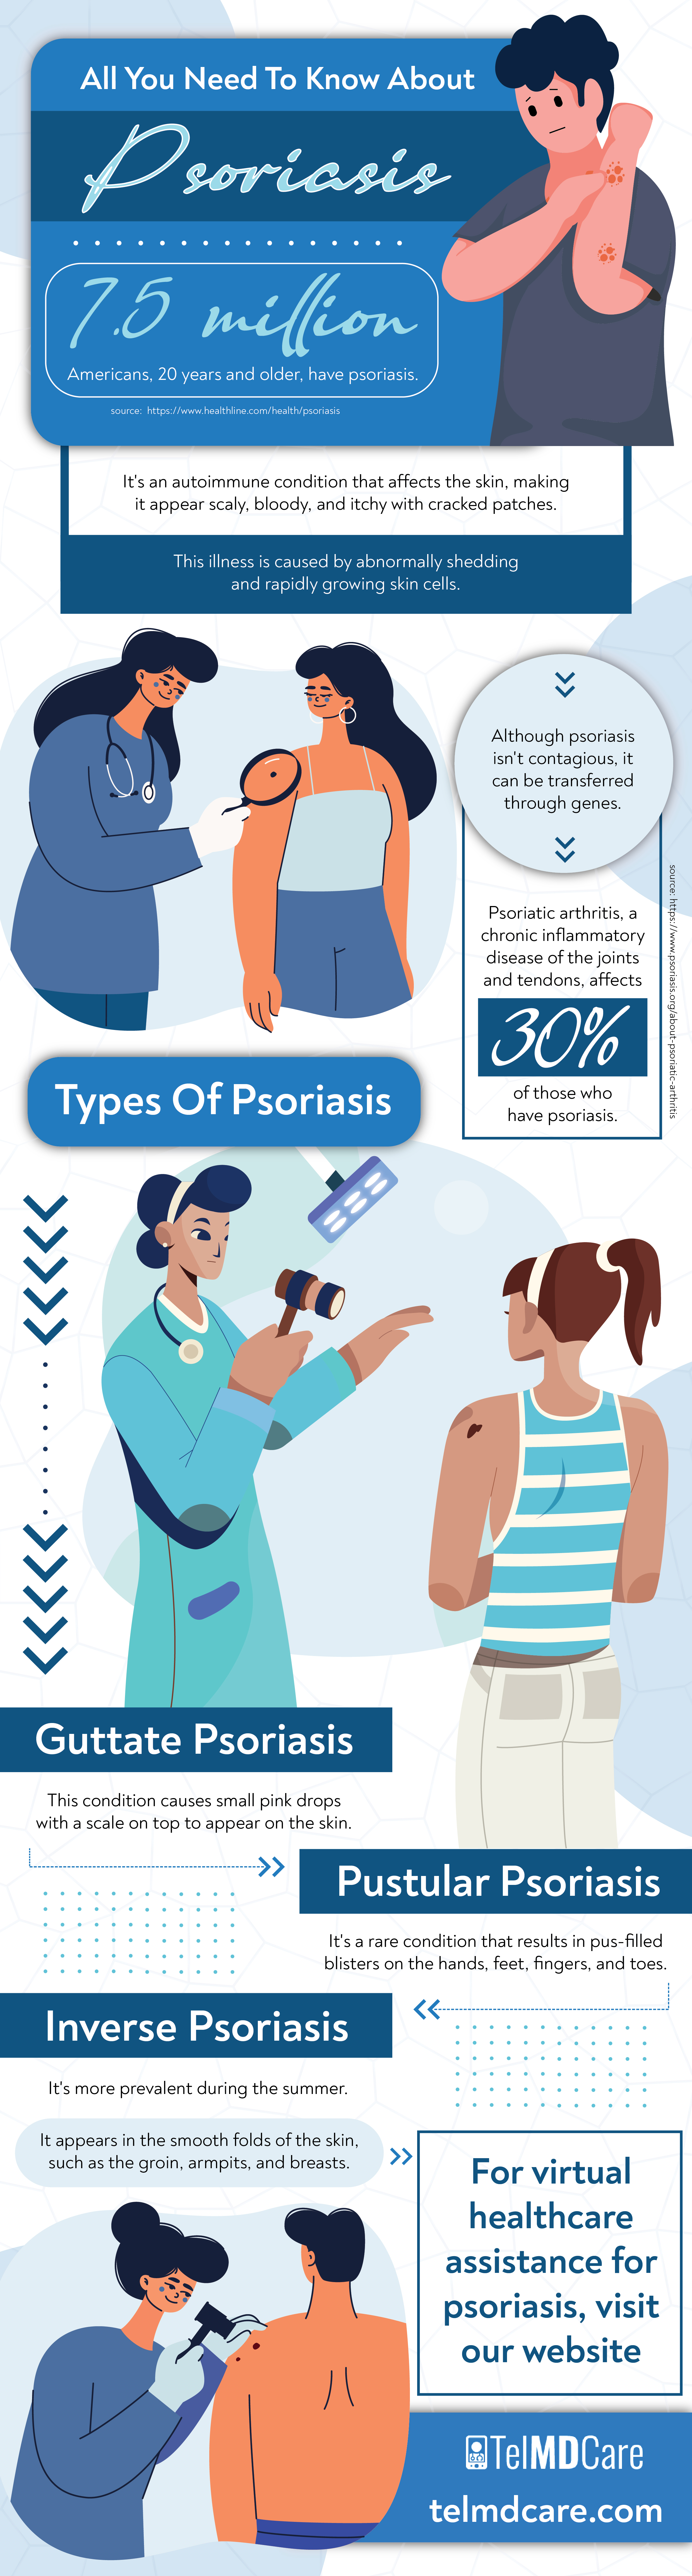 All You Need To Know About Psoriasis